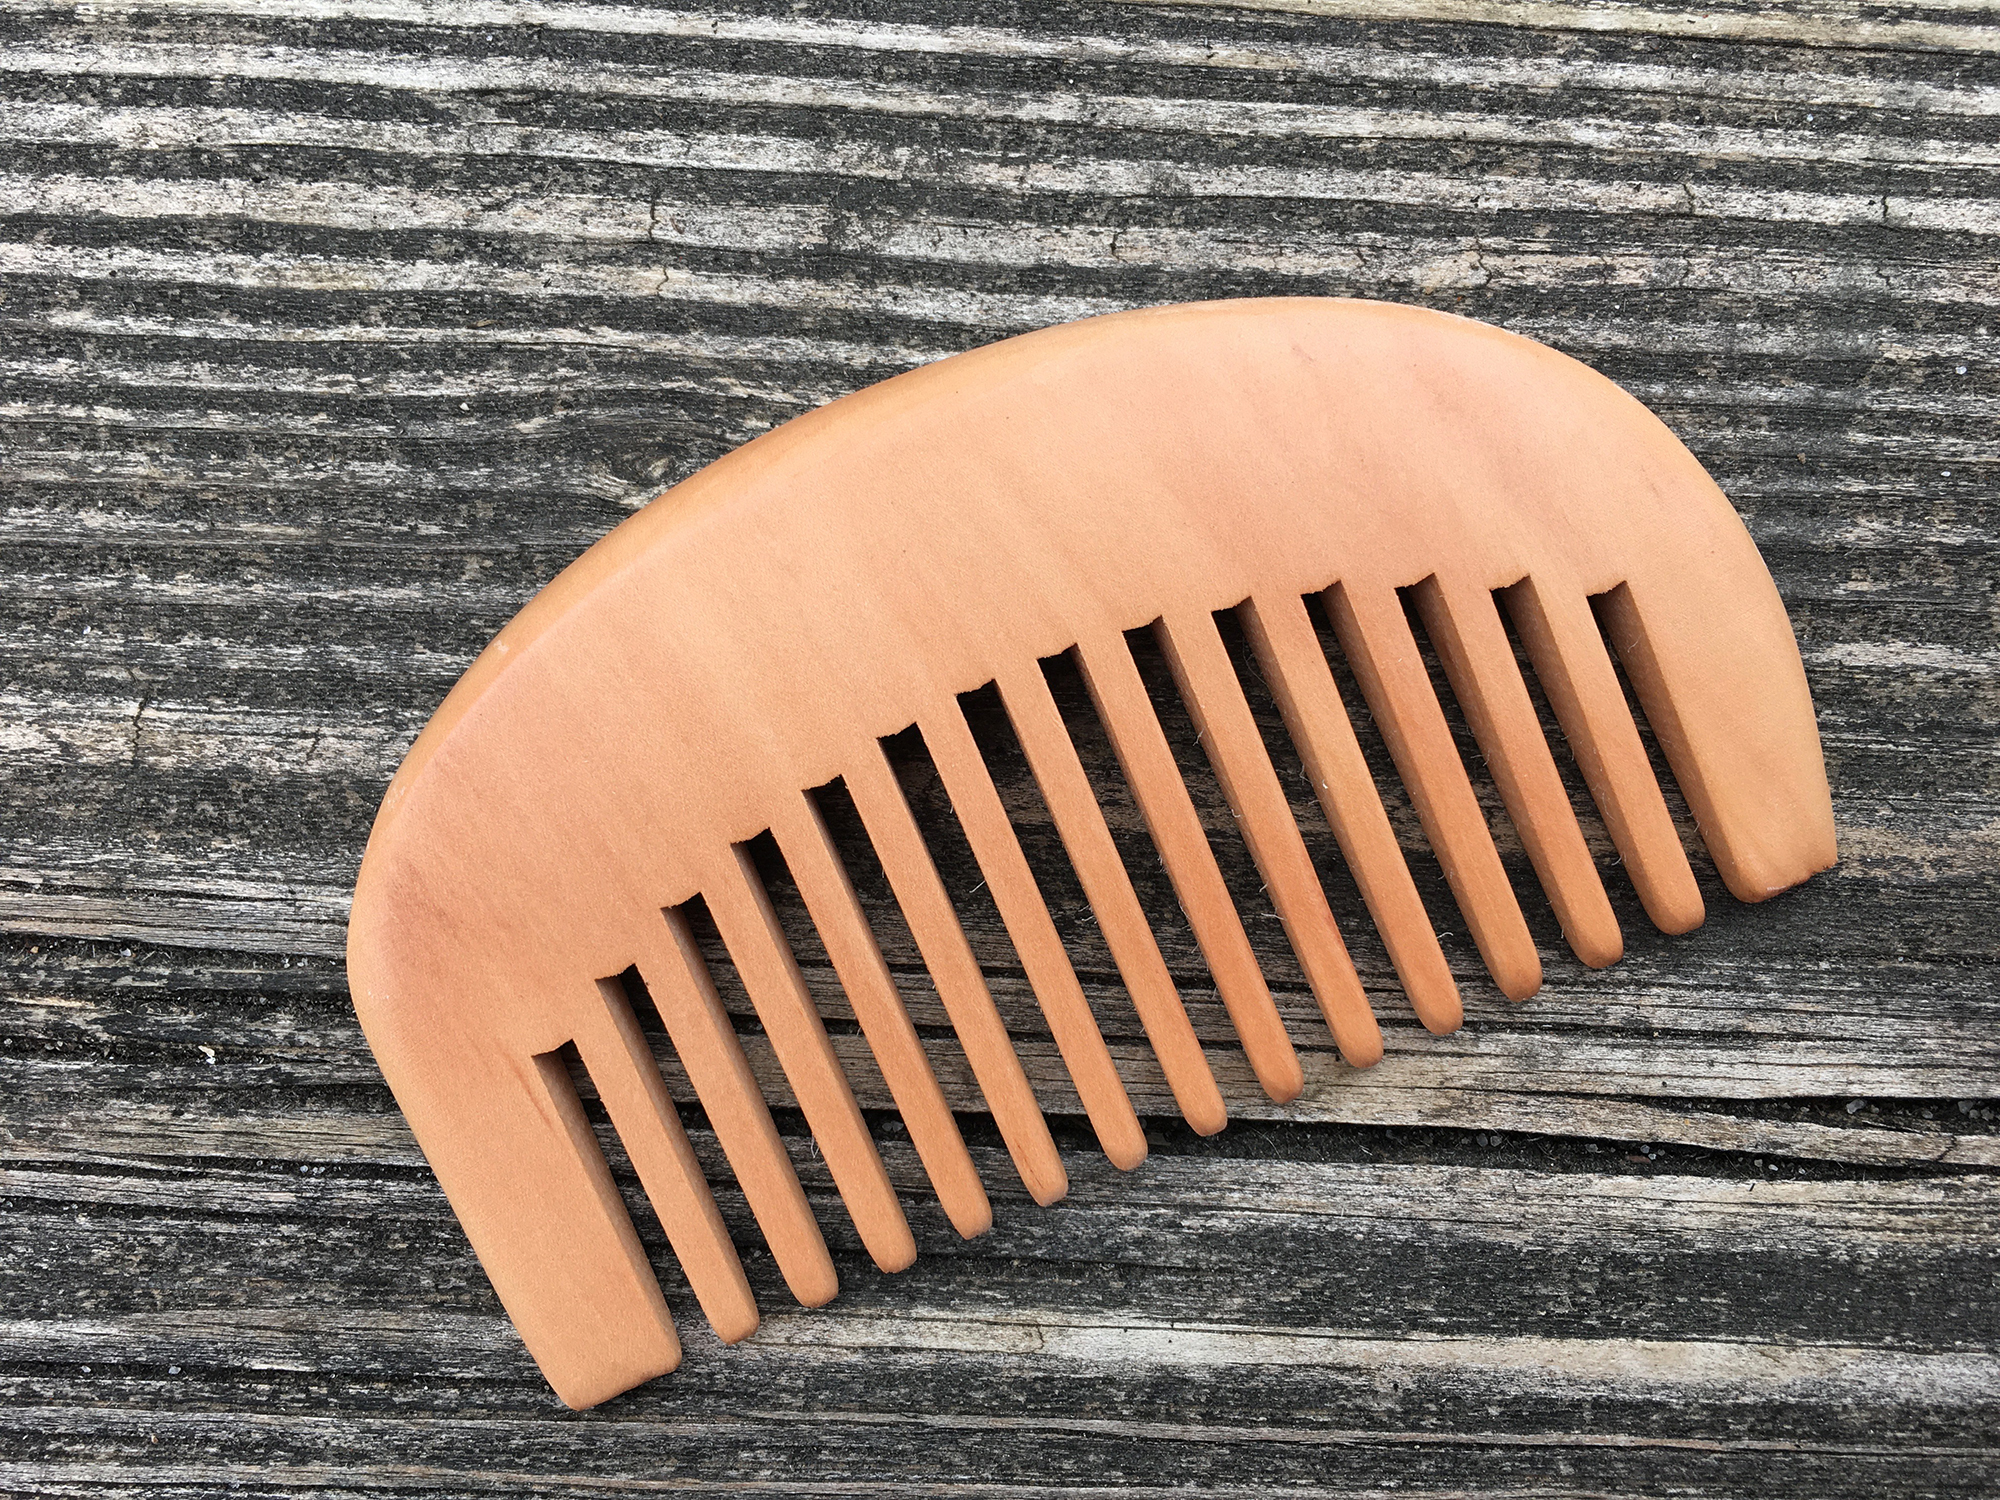 Beard Comb - Click to
Enlarge Photo